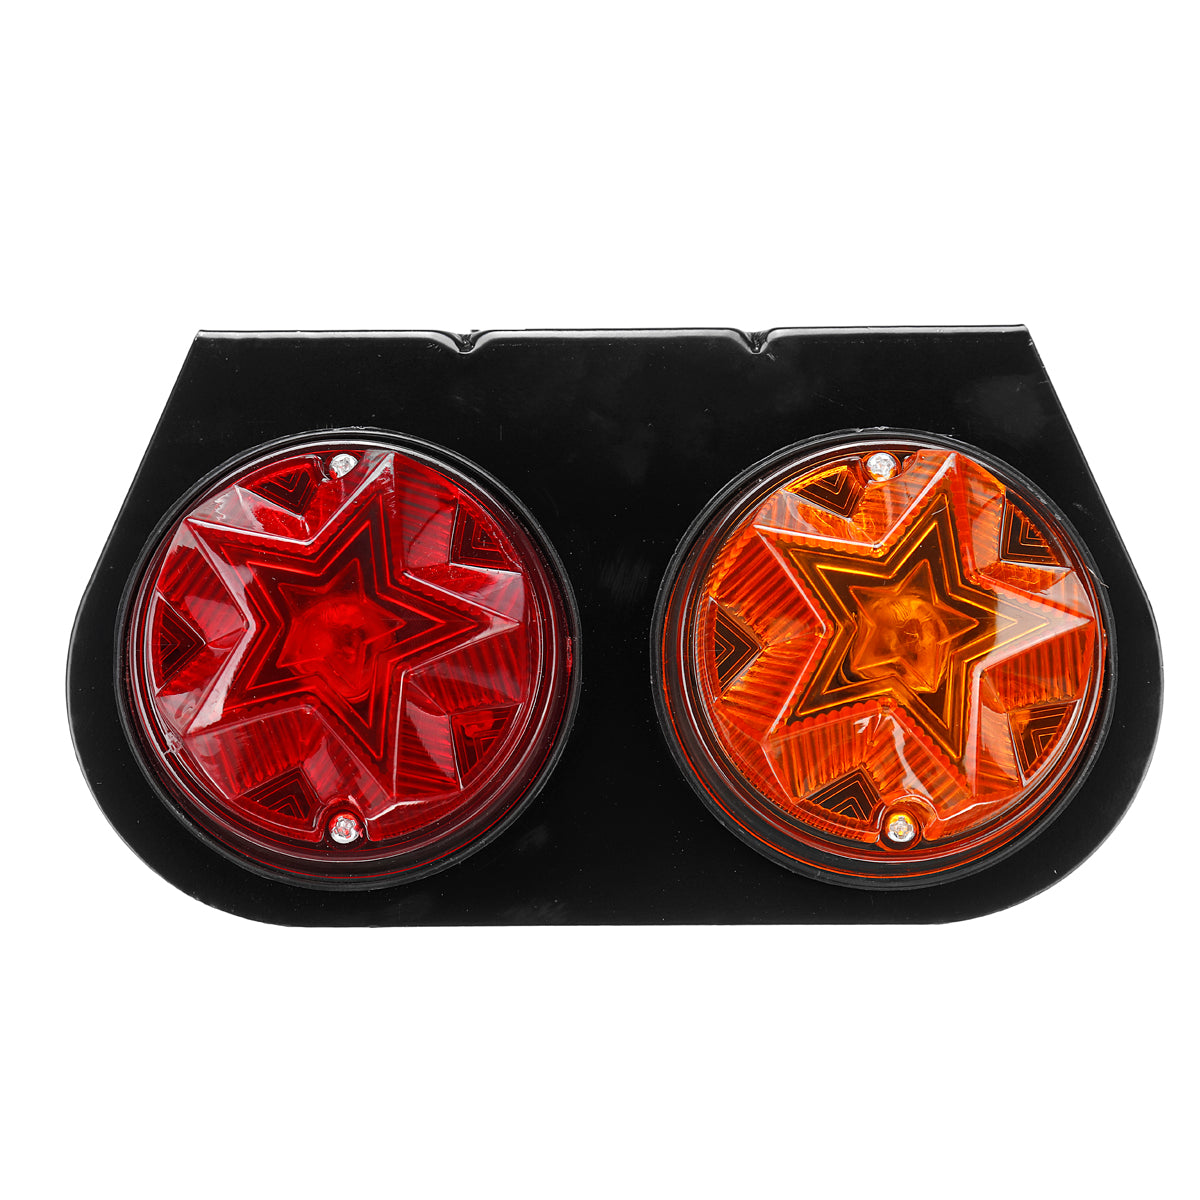 Dark Red 12V LED Indicator Stop Rear Tail Lights Dual Color For Boat Car Truck Trailer